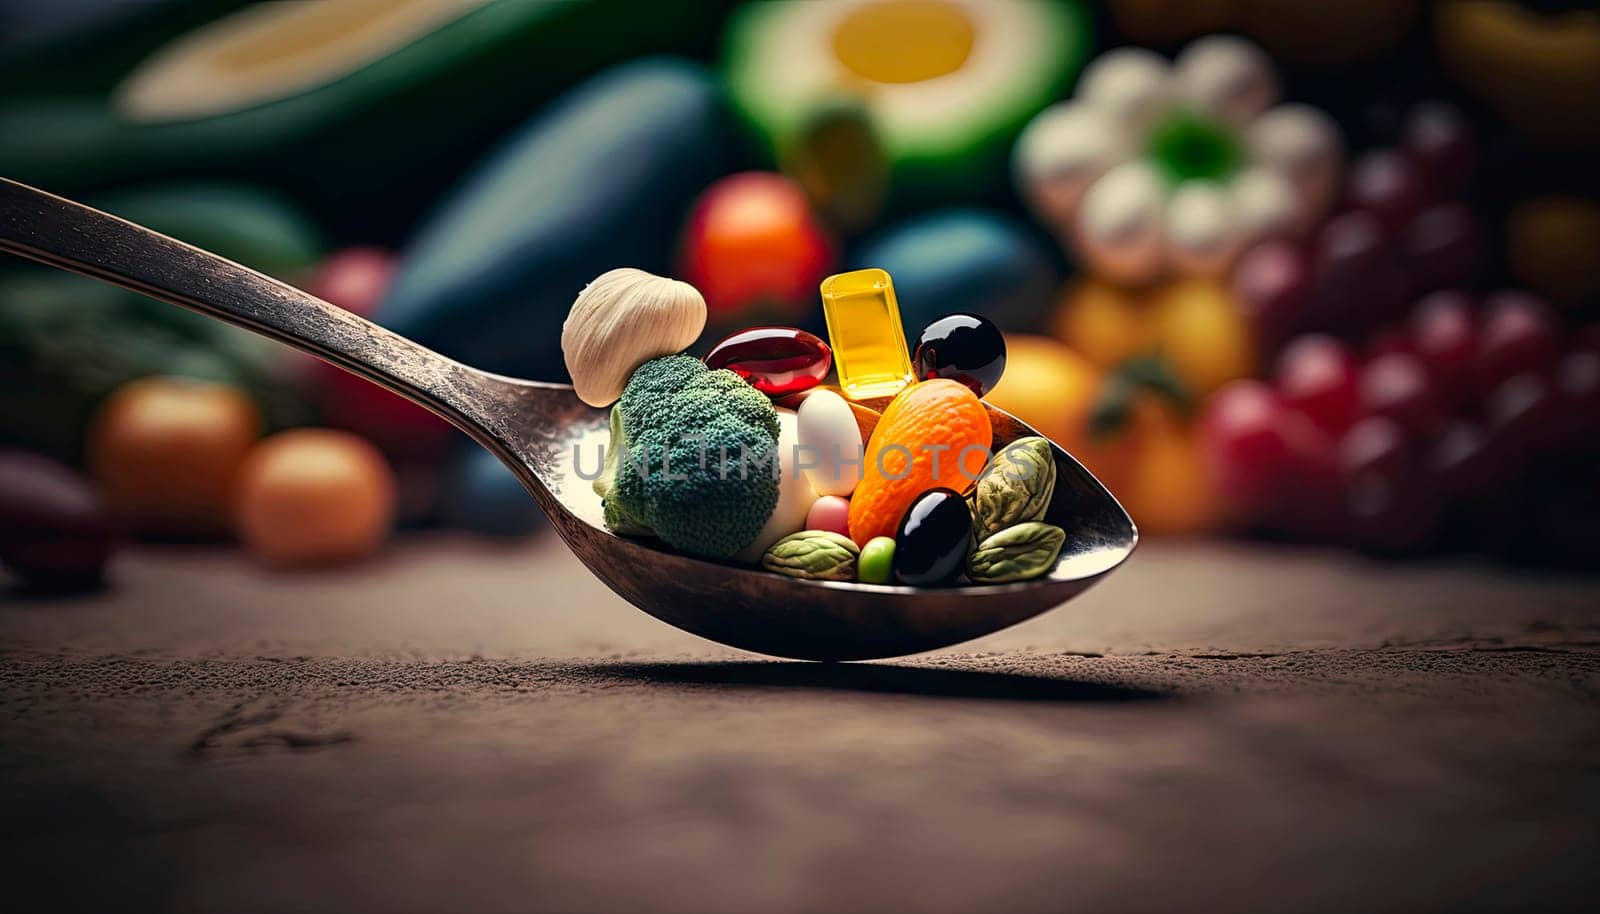 spoon full of supplements on the background of vegetables, fruits. by yanadjana